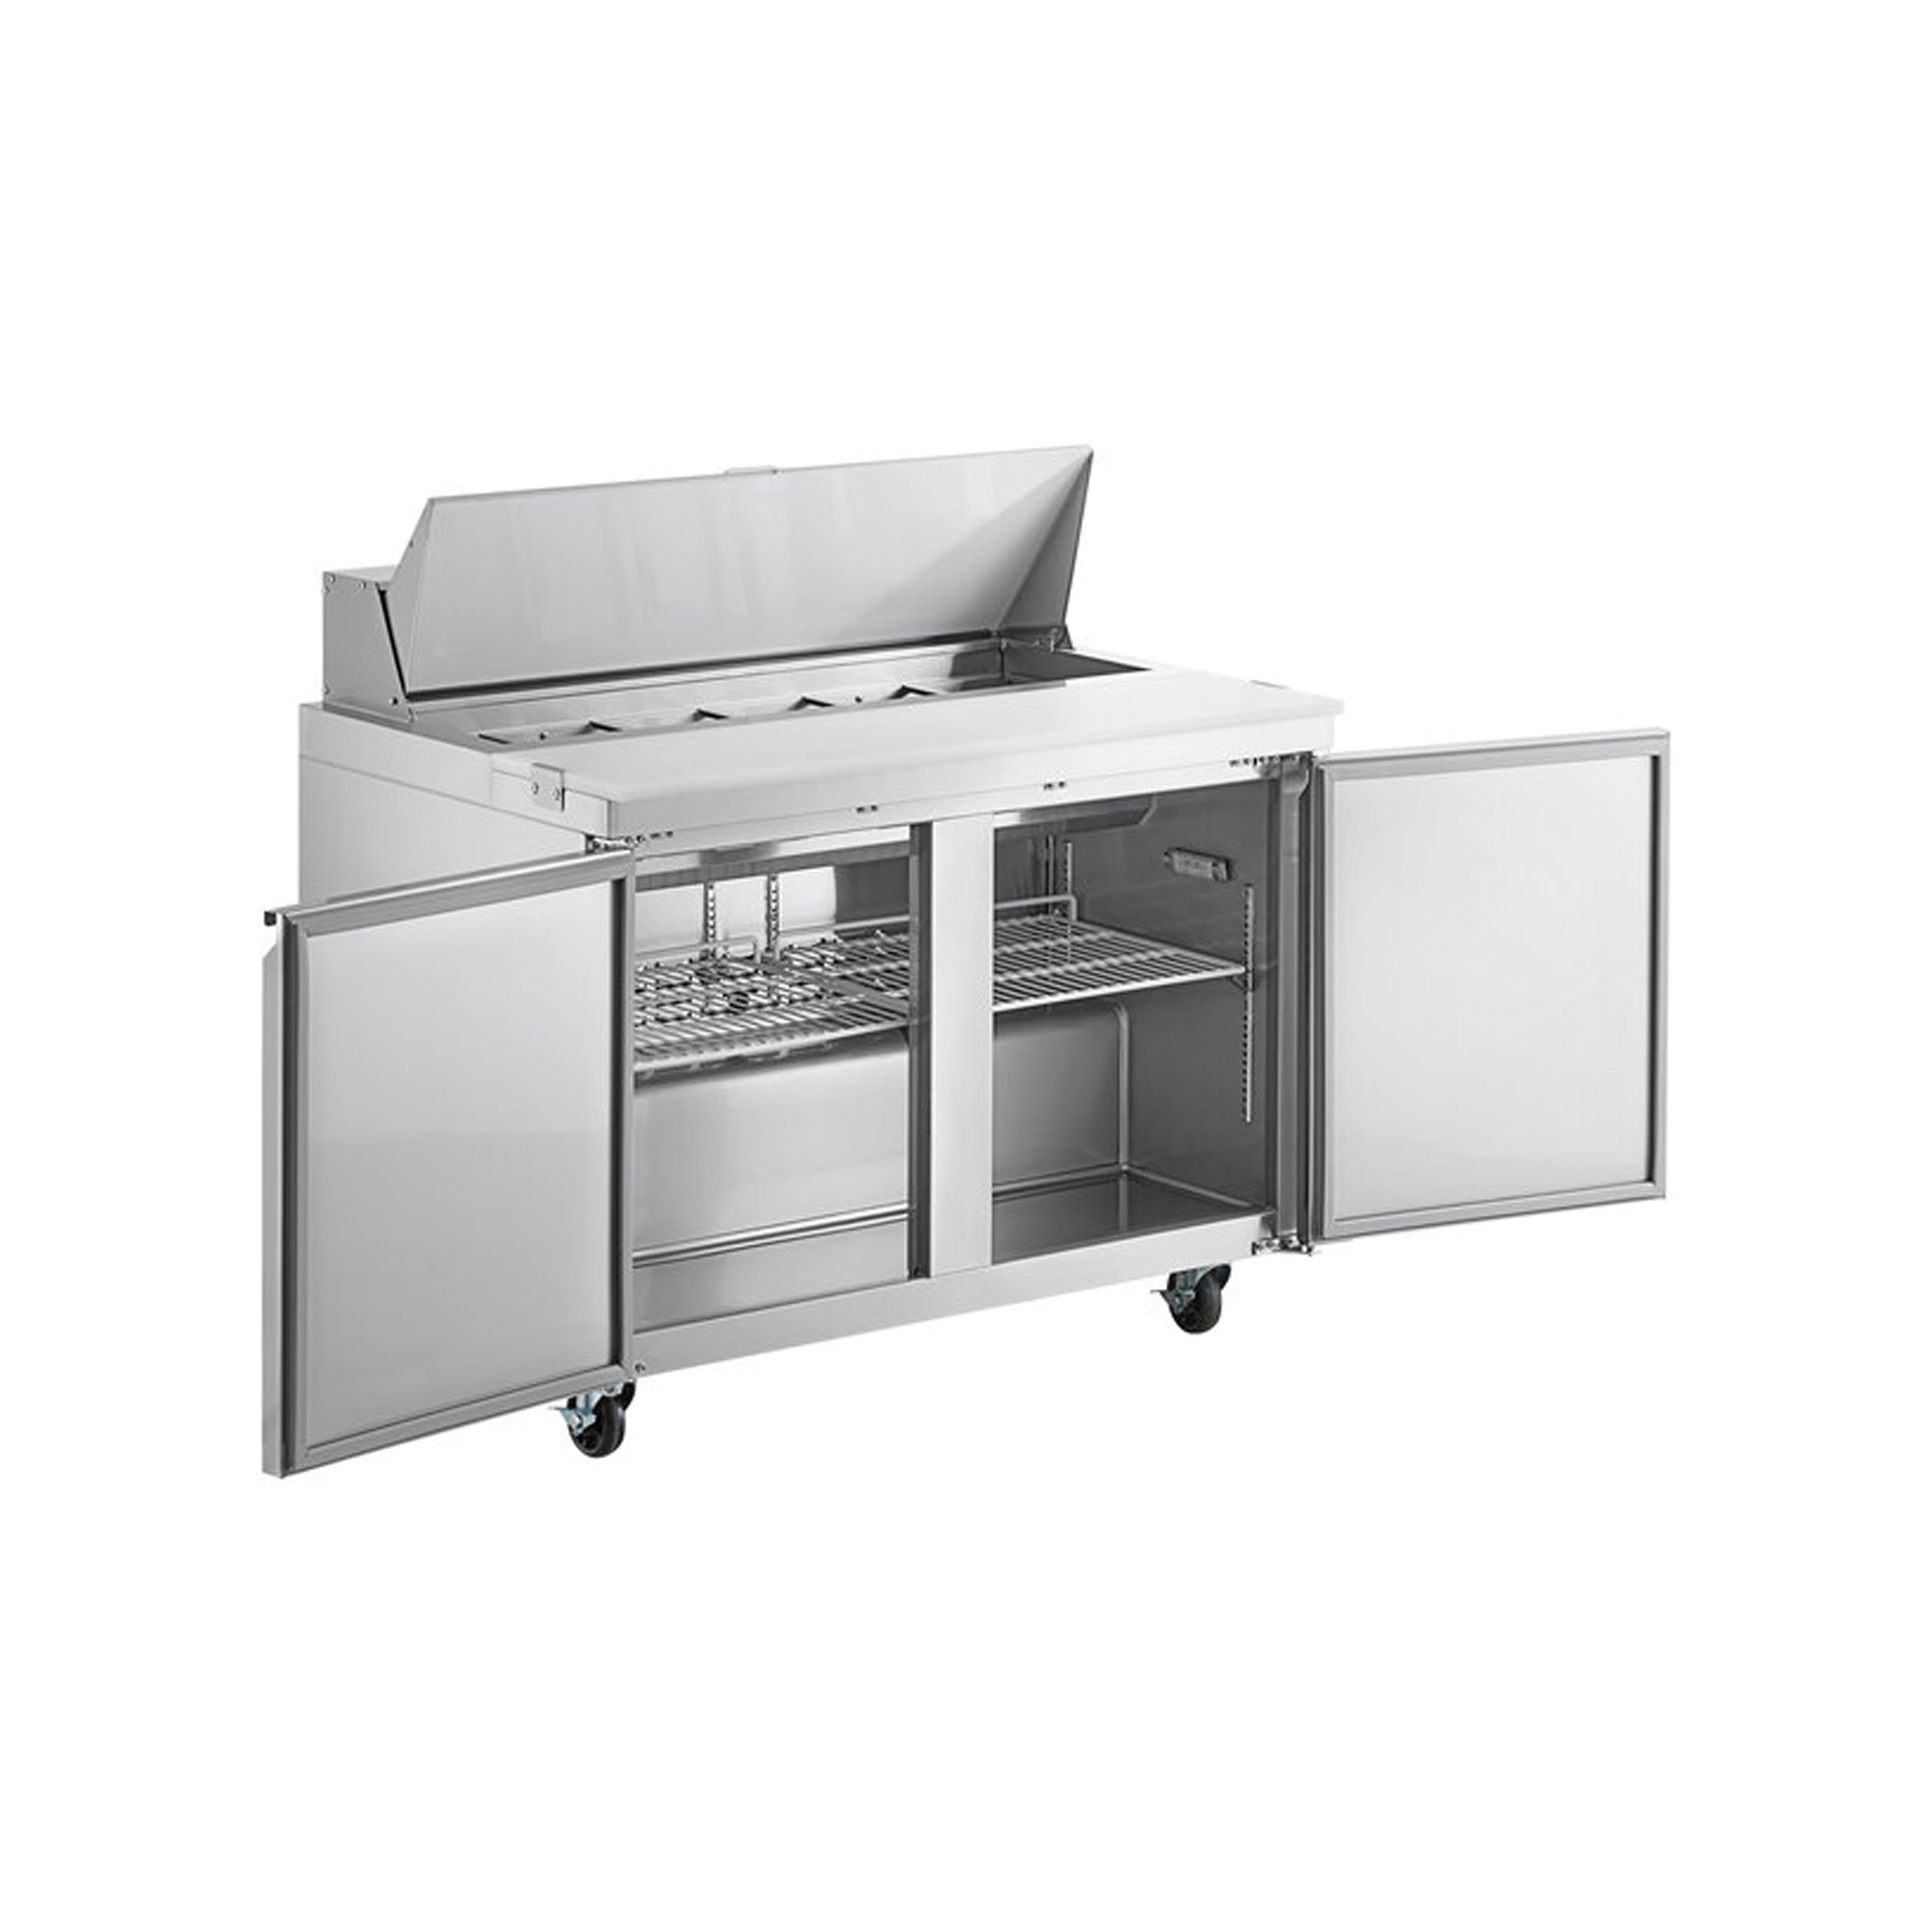 Chef AAA - SS-PT-46M-HC, Commercial 46" Sandwich Prep Table Refrigerator MEGA TOP 18 Pans 2 Door Stainless Steel 9.5 cu.ft.